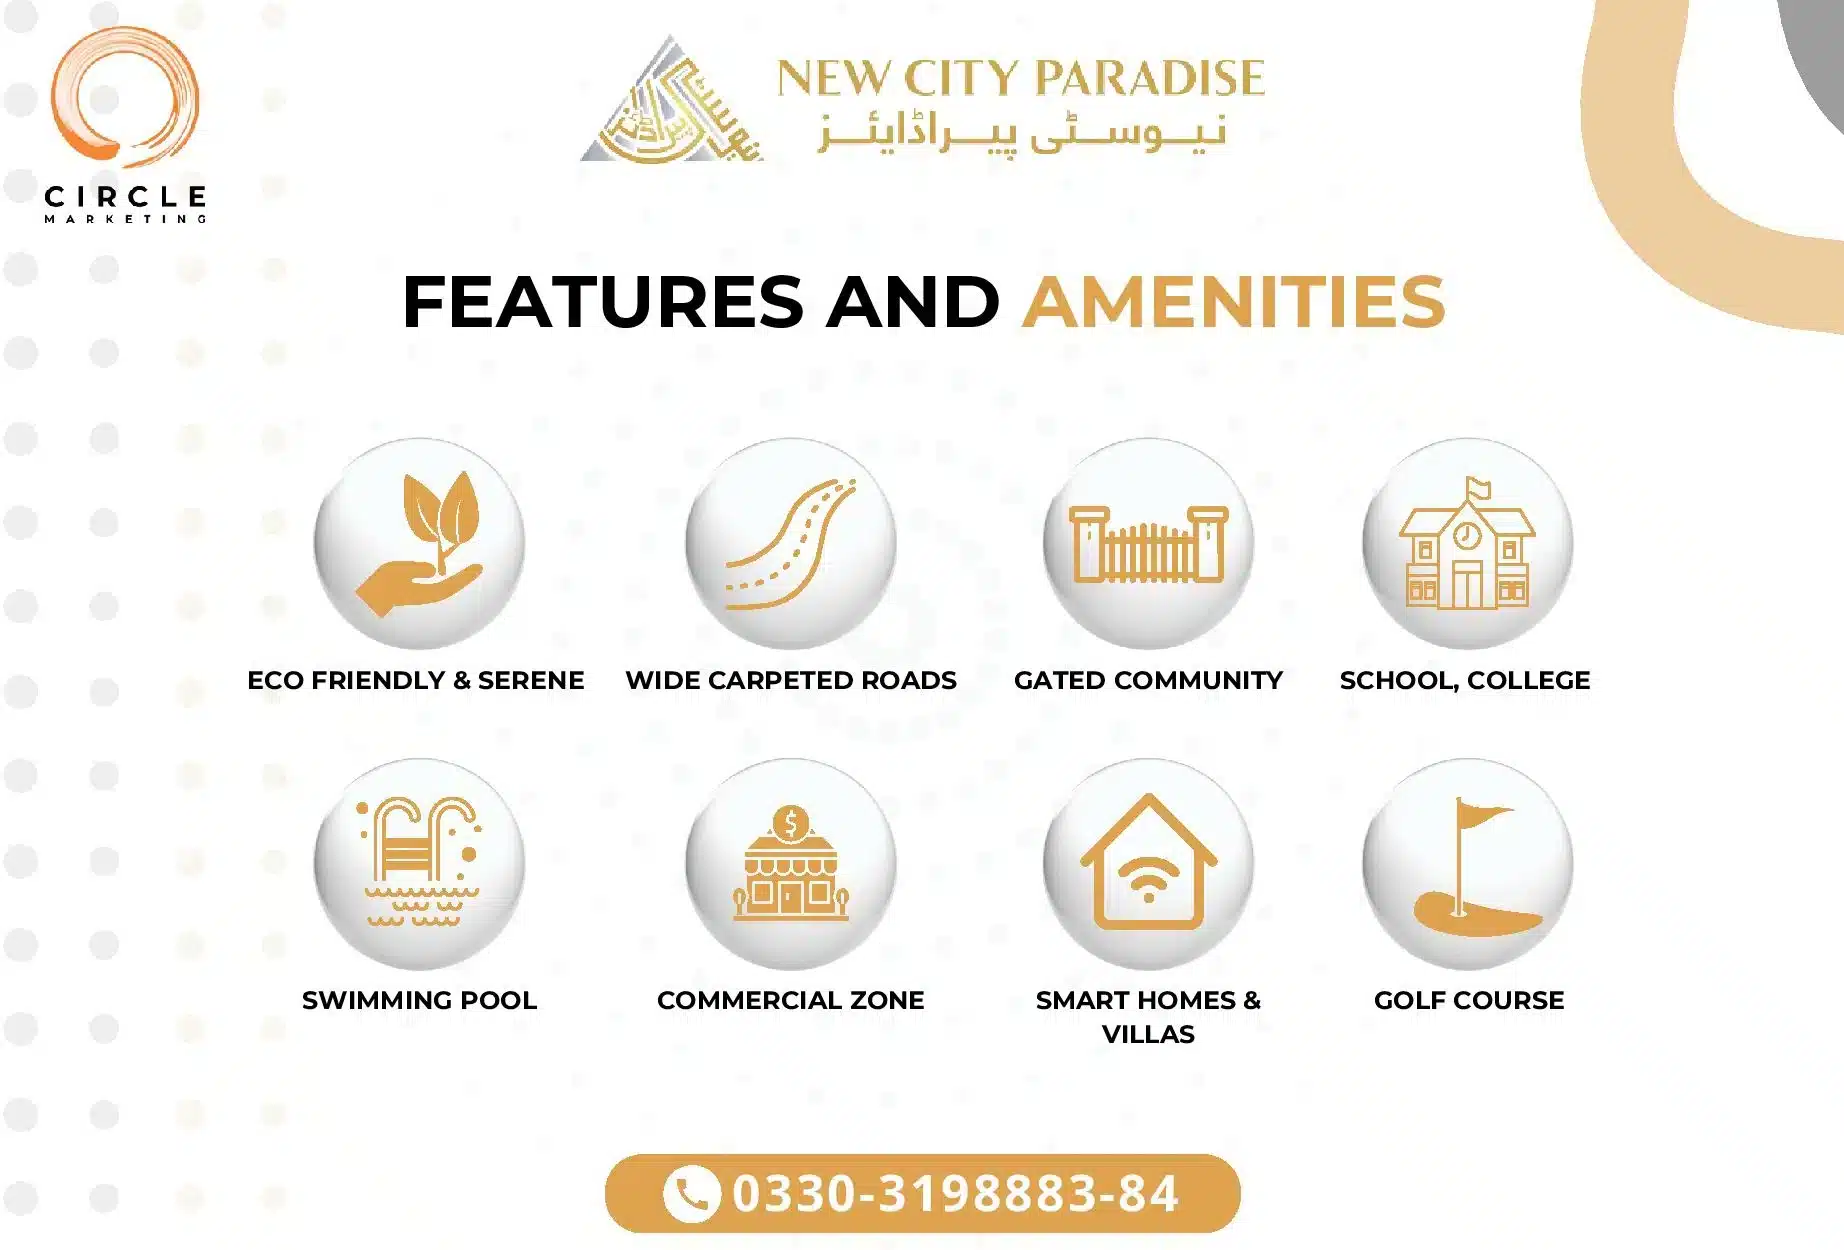 New City Paradise Features and amenities